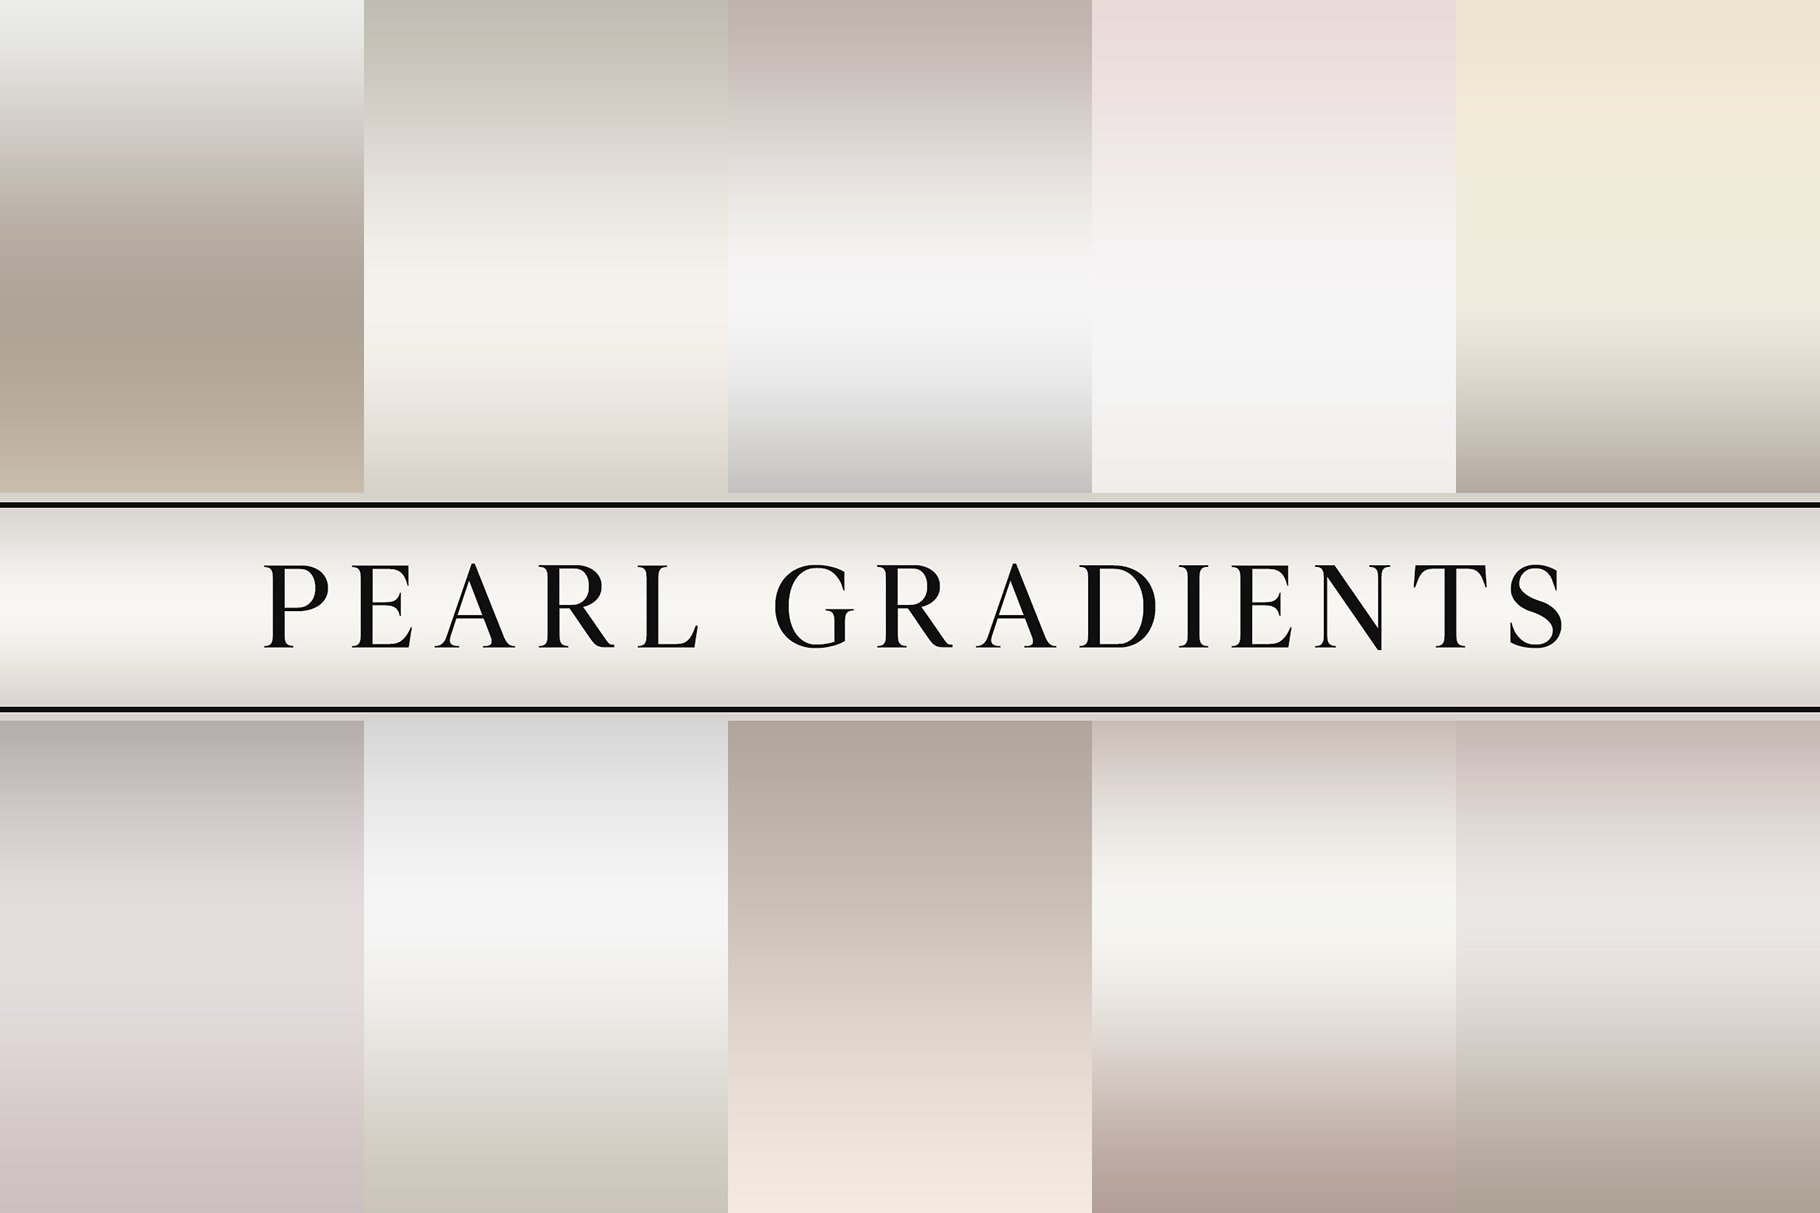 Pearl Gradientscover image.